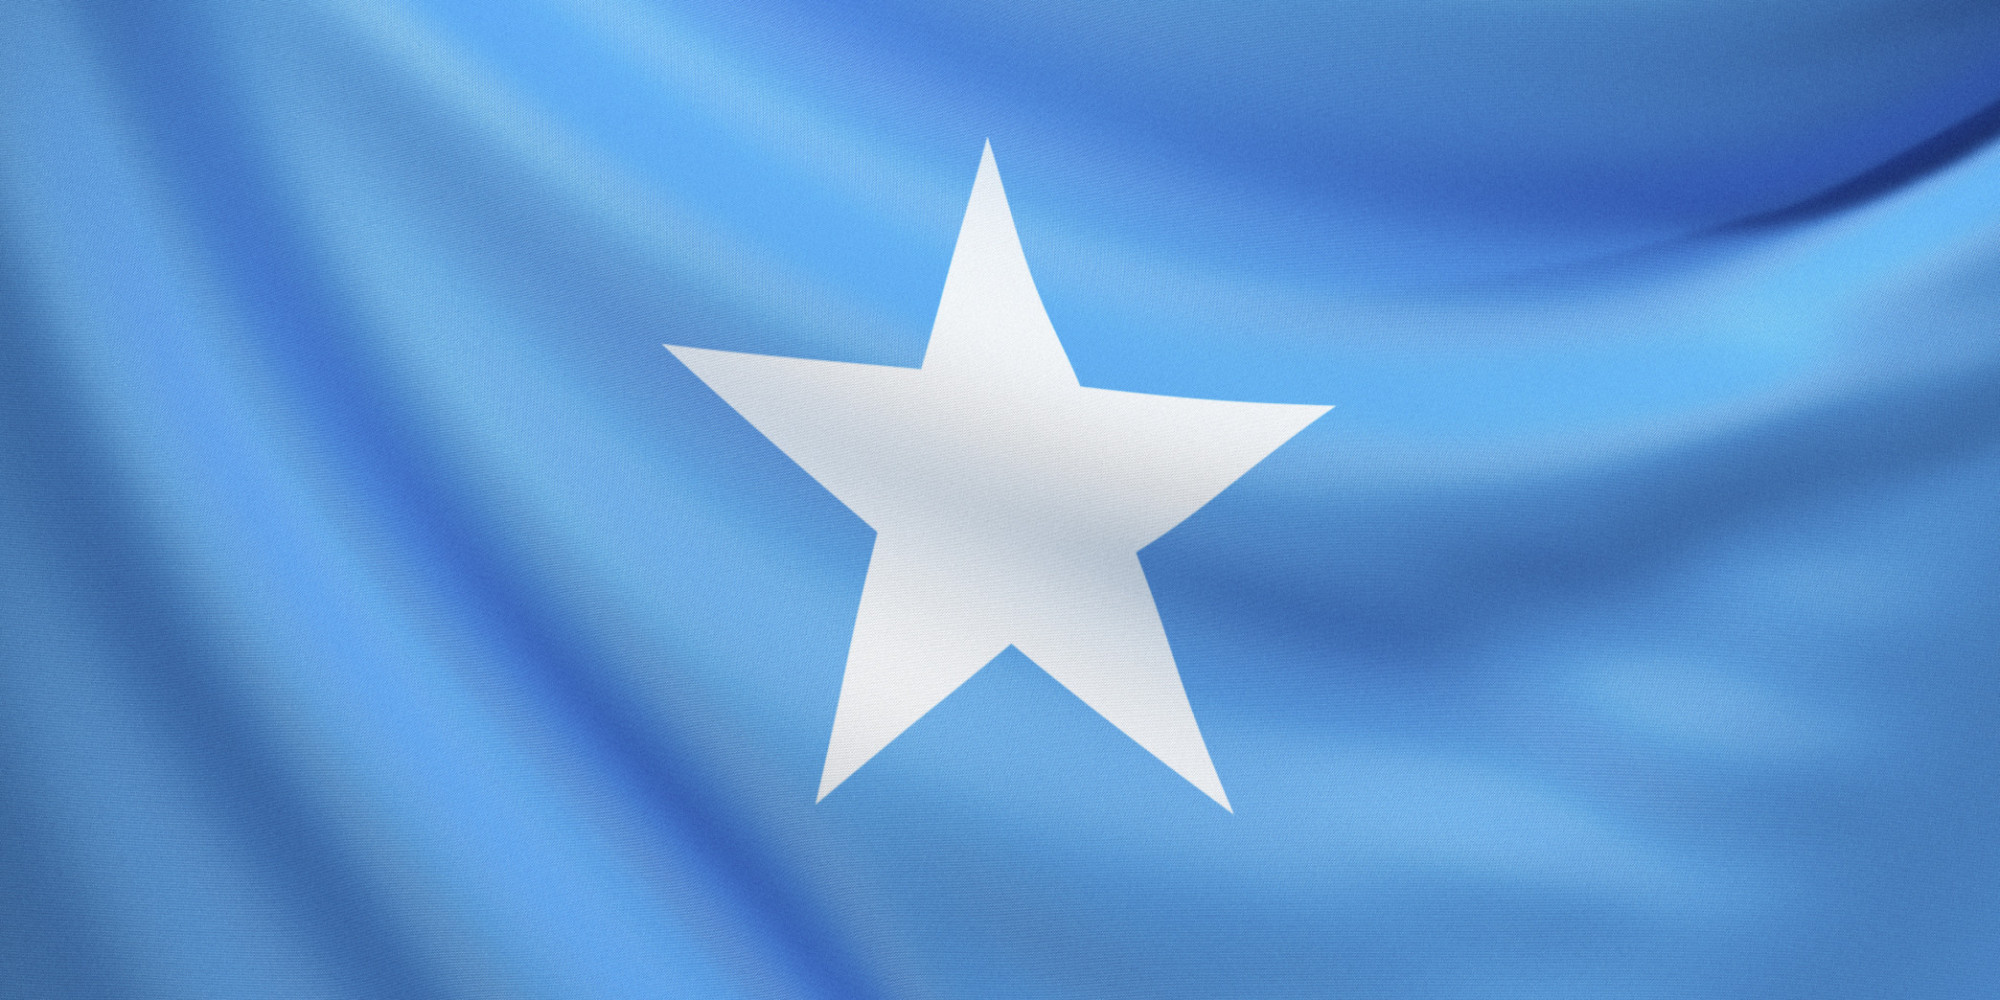 Everything Must Go Somalia Sells Its Dignity HuffPost